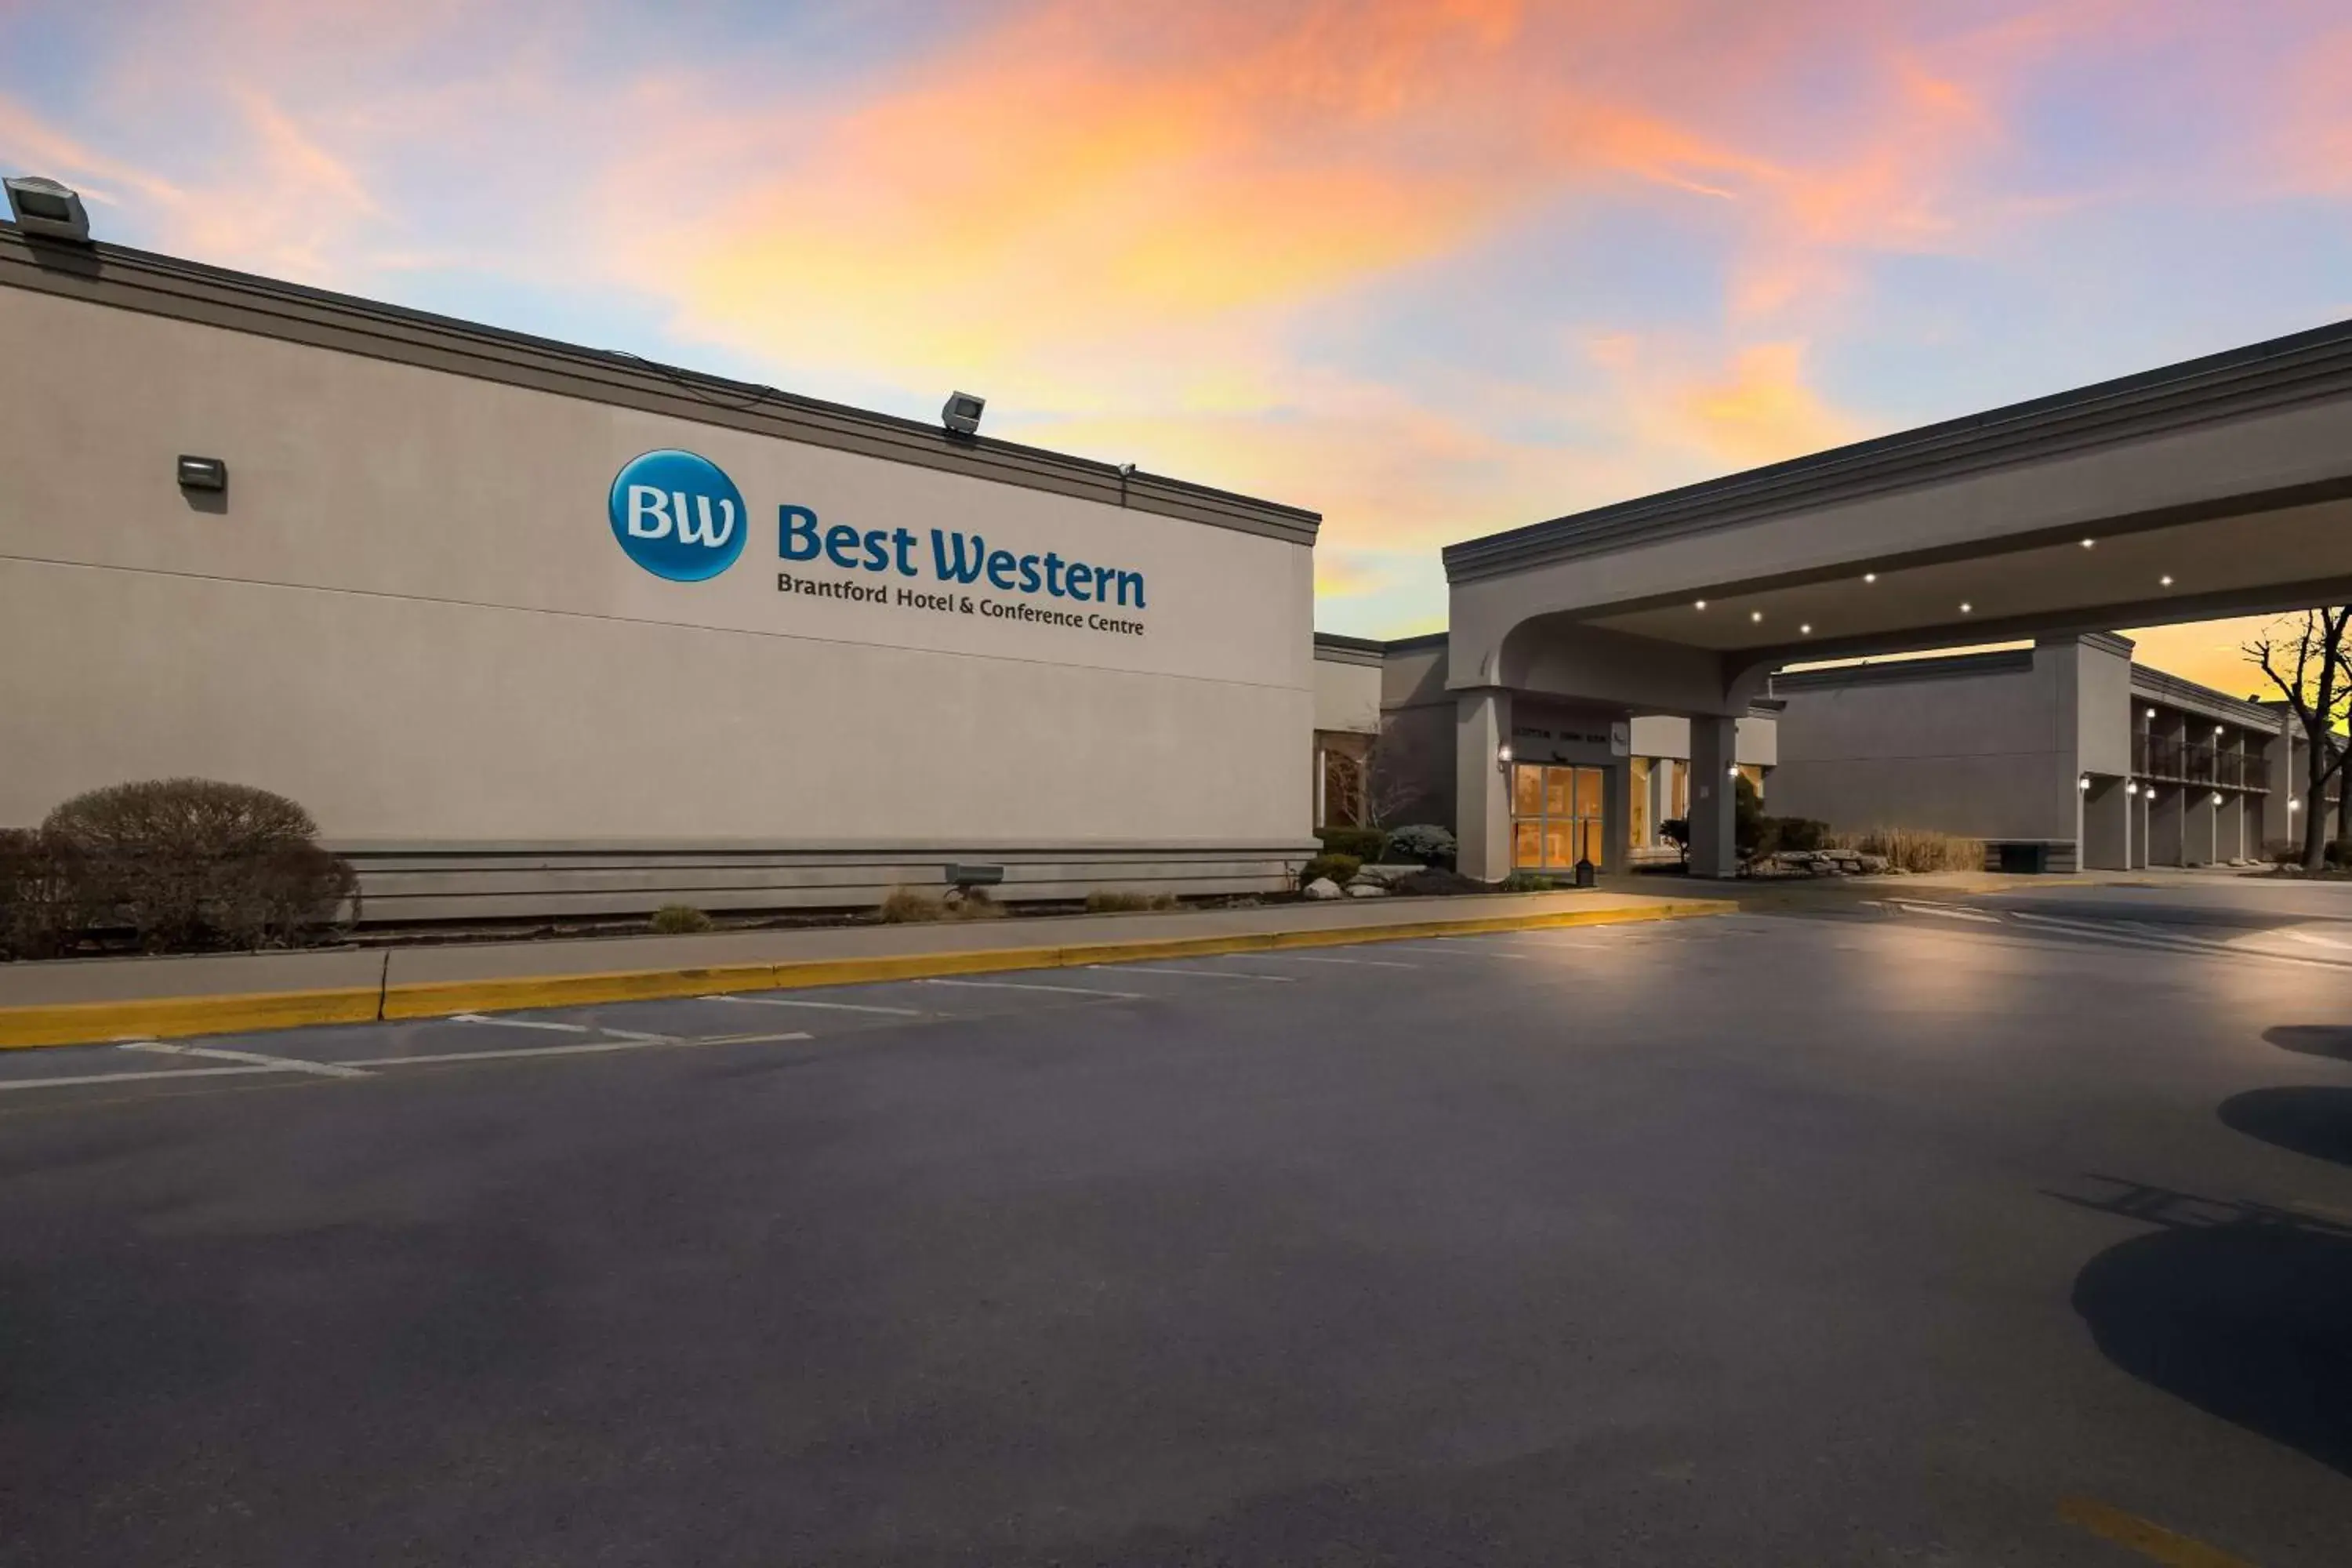 Property building in Best Western Brantford Hotel and Conference Centre